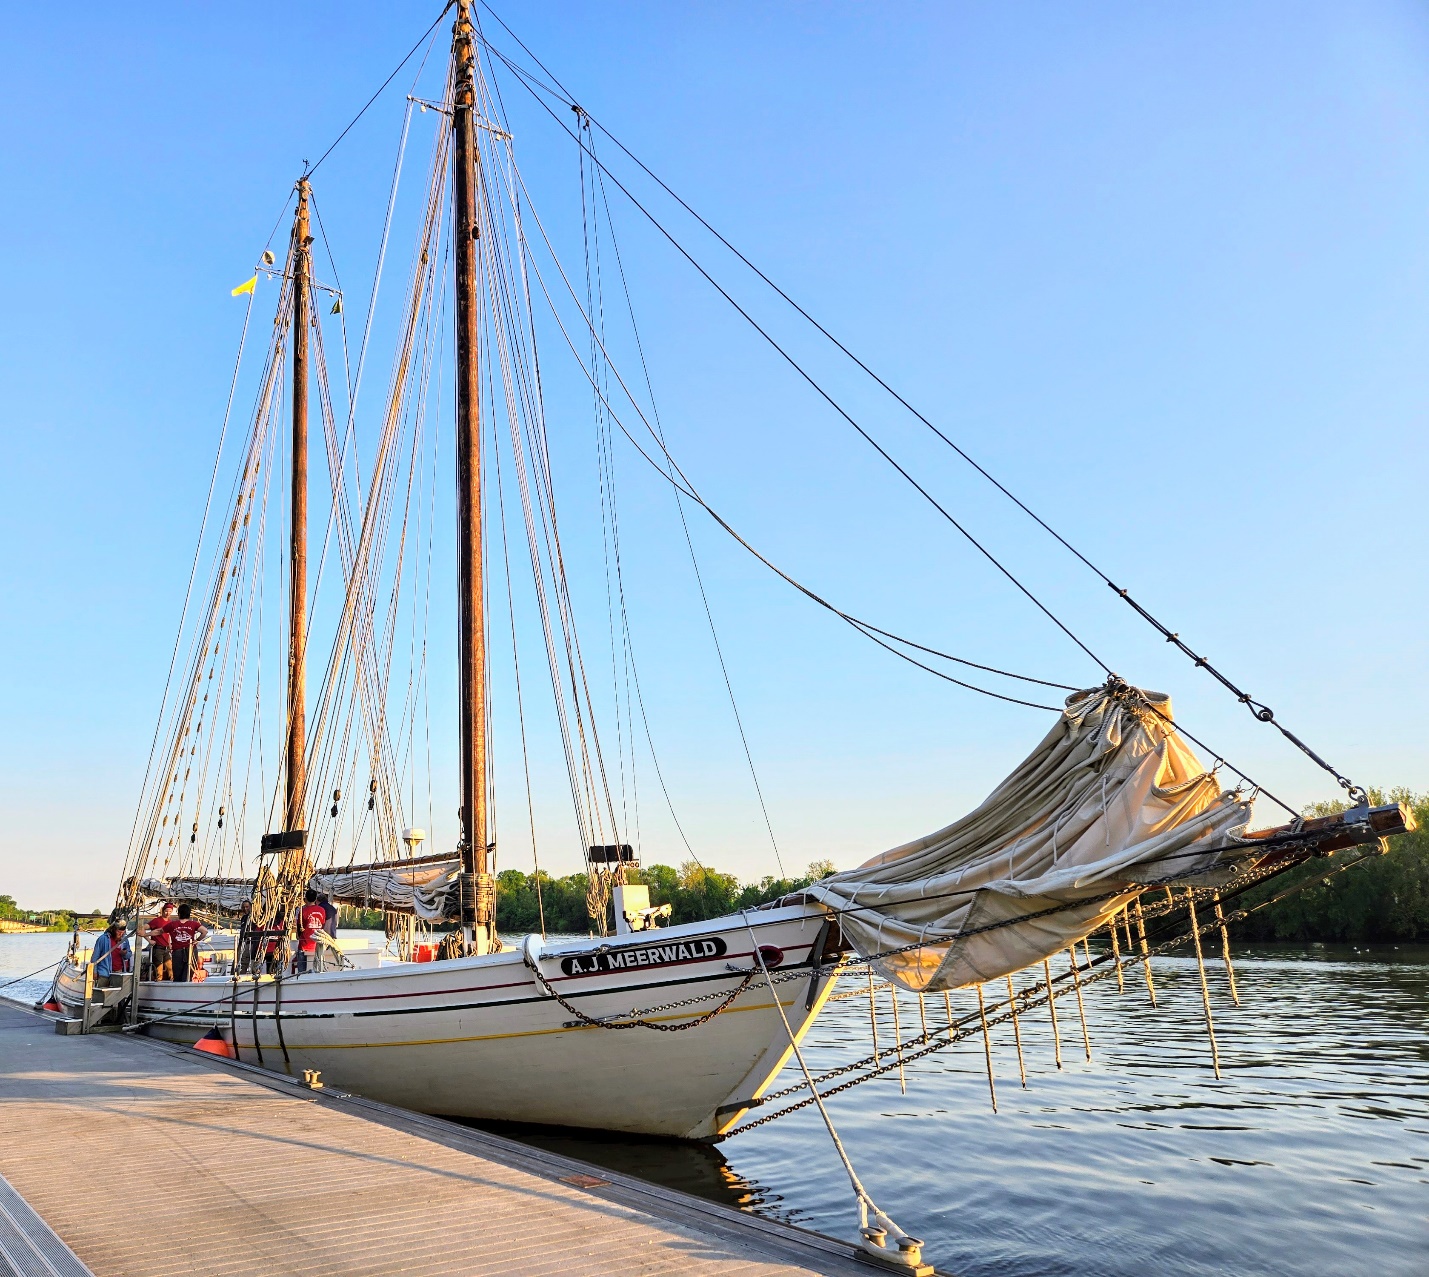 Have you ever sailed on the official tall ship of New Jersey?